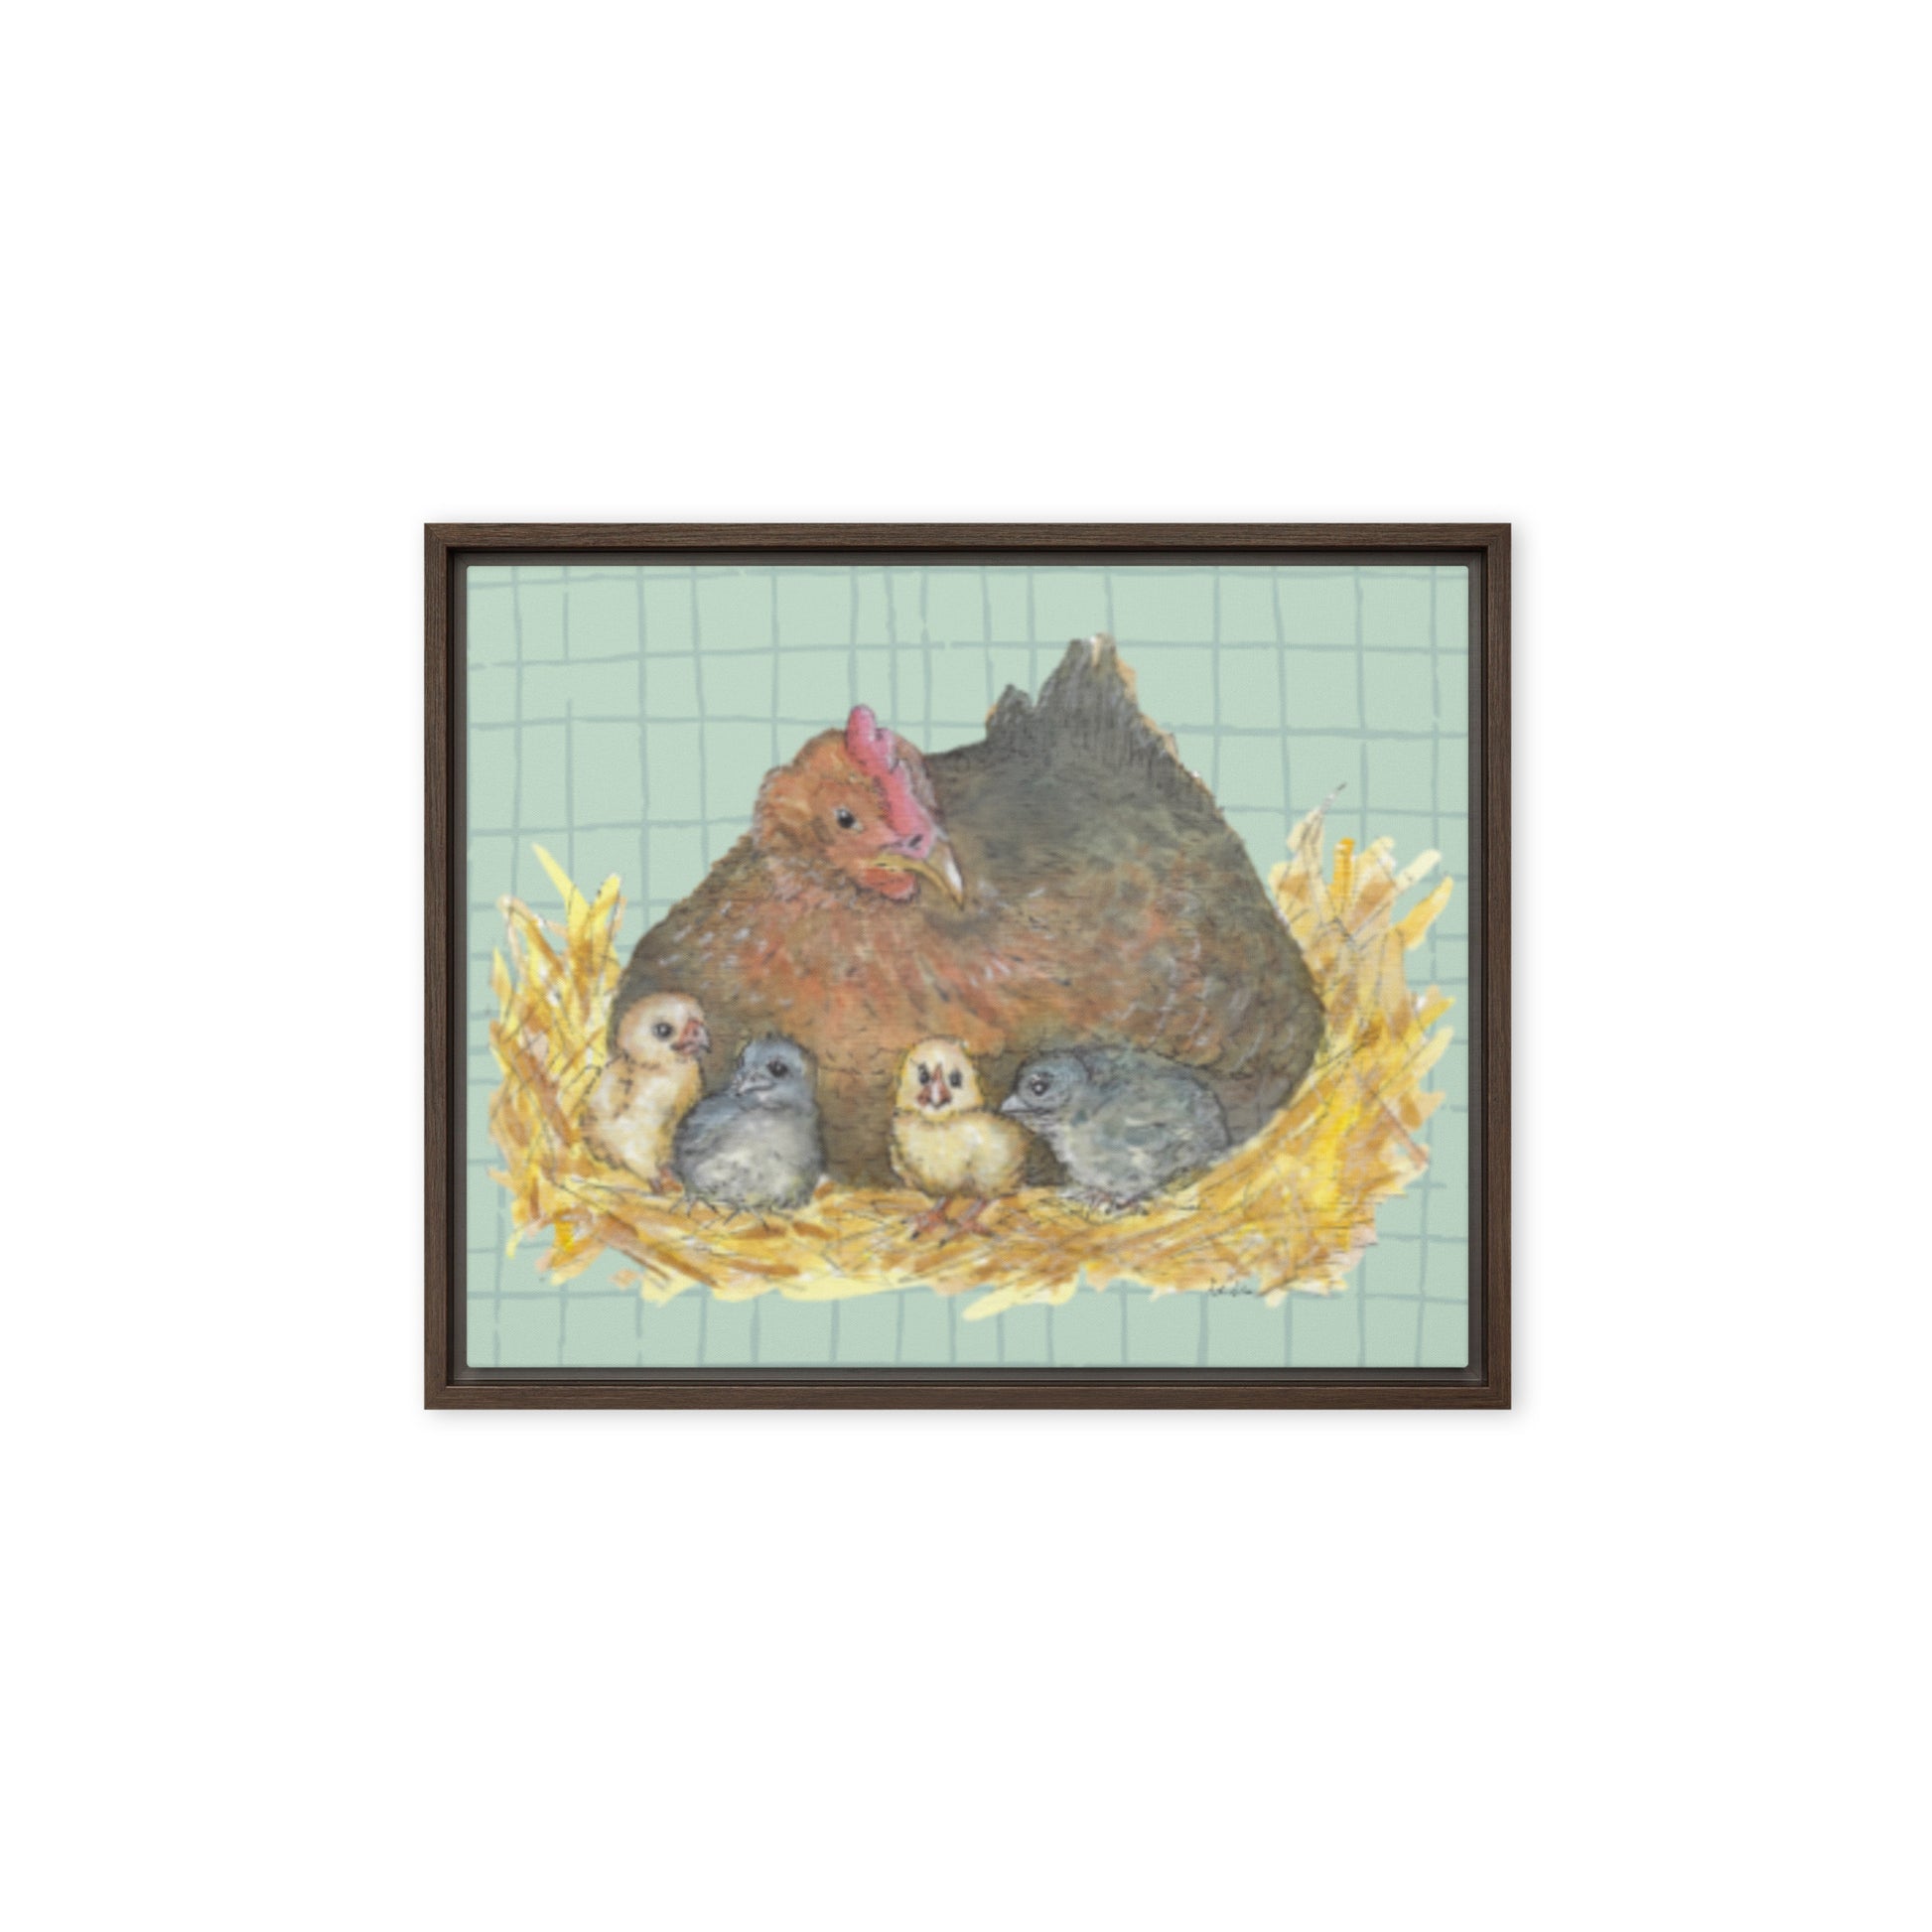 8 by 10 inch Mother Hen Floating Frame Canvas Wall Art. Heather Silver's watercolor painting, Mother Hen, with a green crosshatched background, printed on a stretched canvas and framed with a dark brown pine frame. Hanging hardware included.